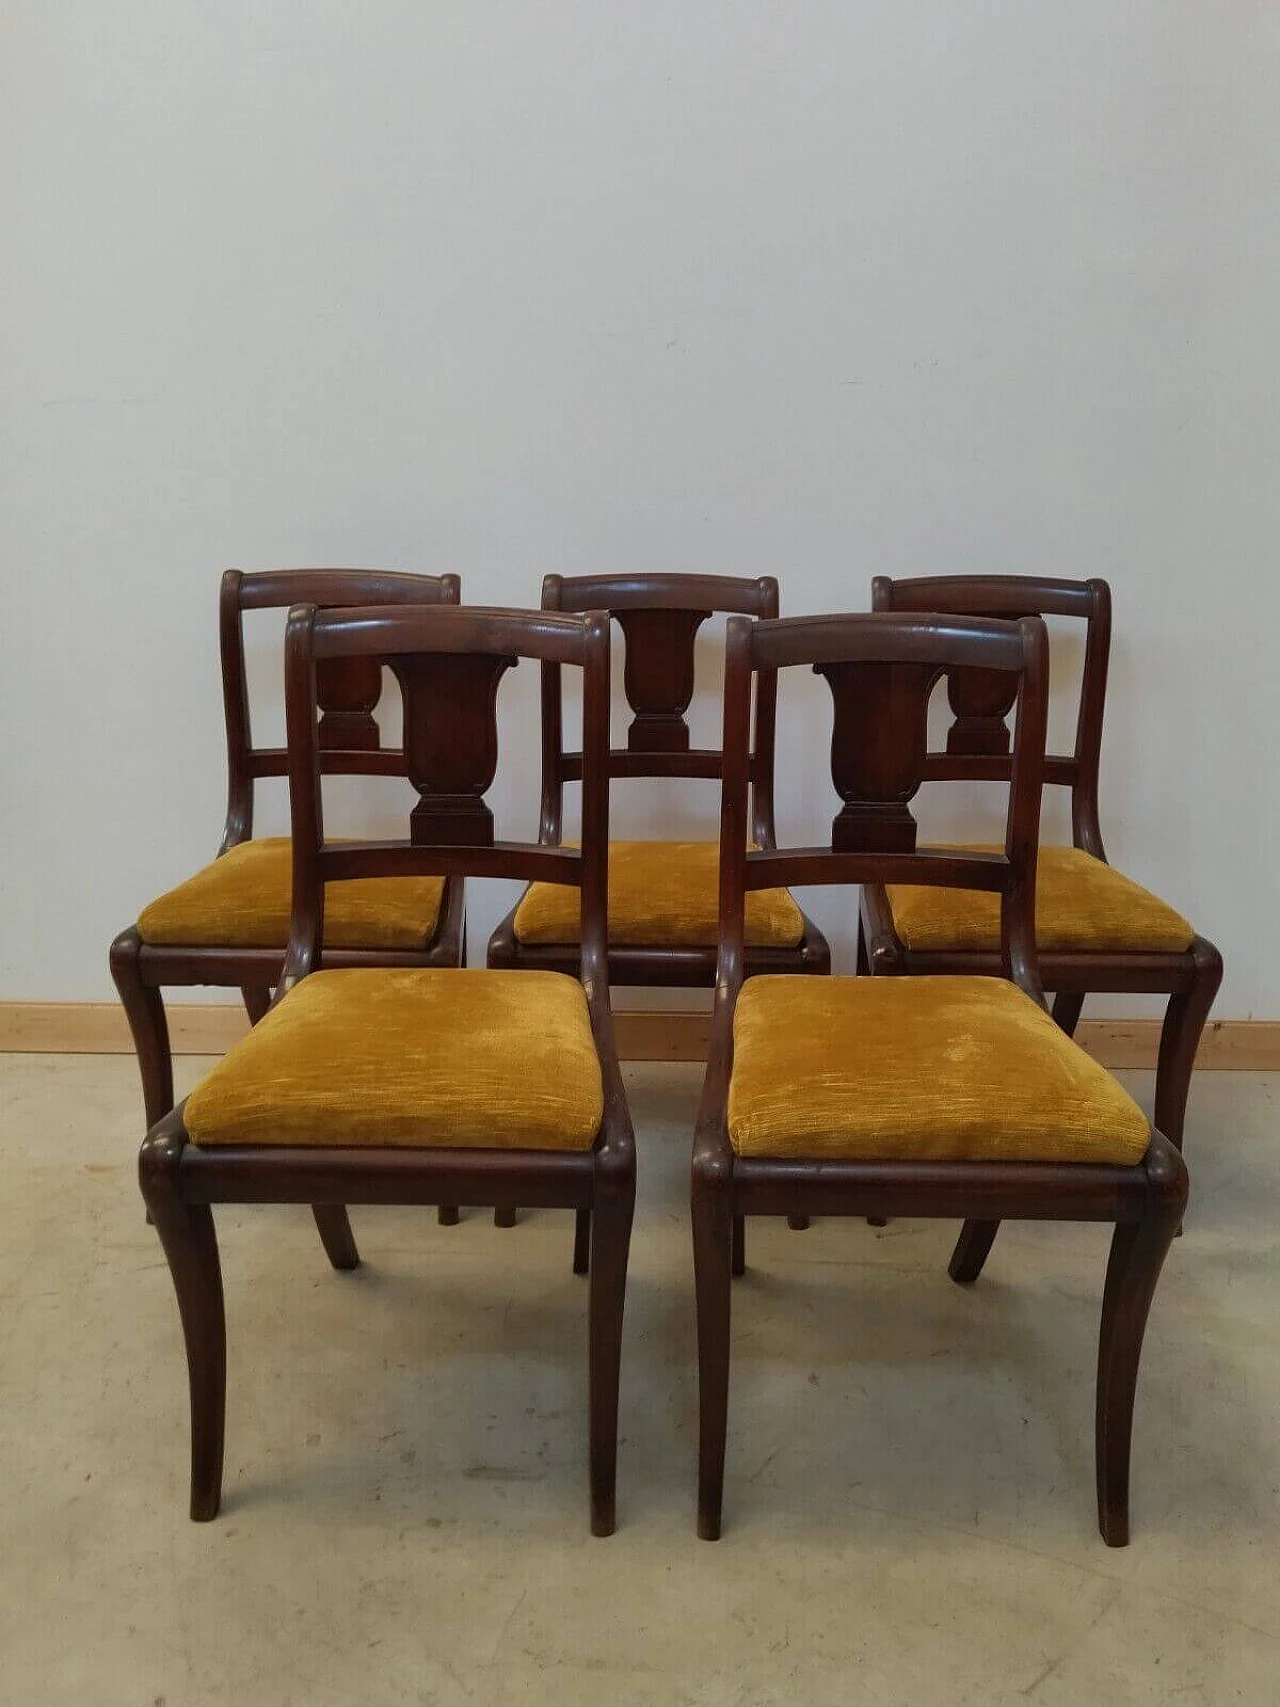 5 Empire-style walnut chairs, early 20th century 15